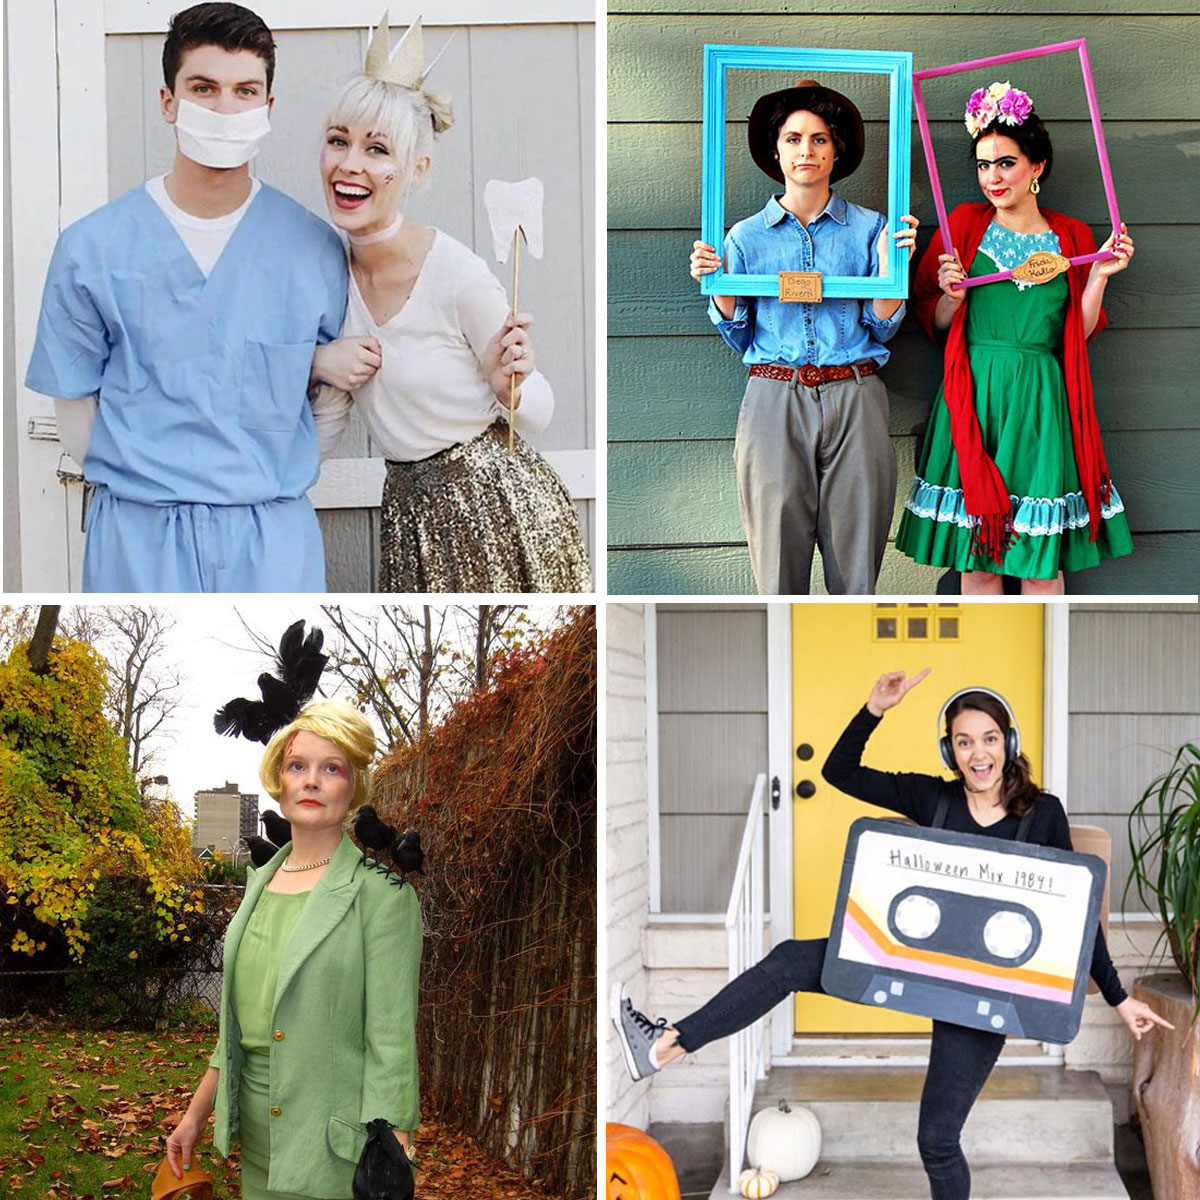 Funny Halloween costumes for adults collage.